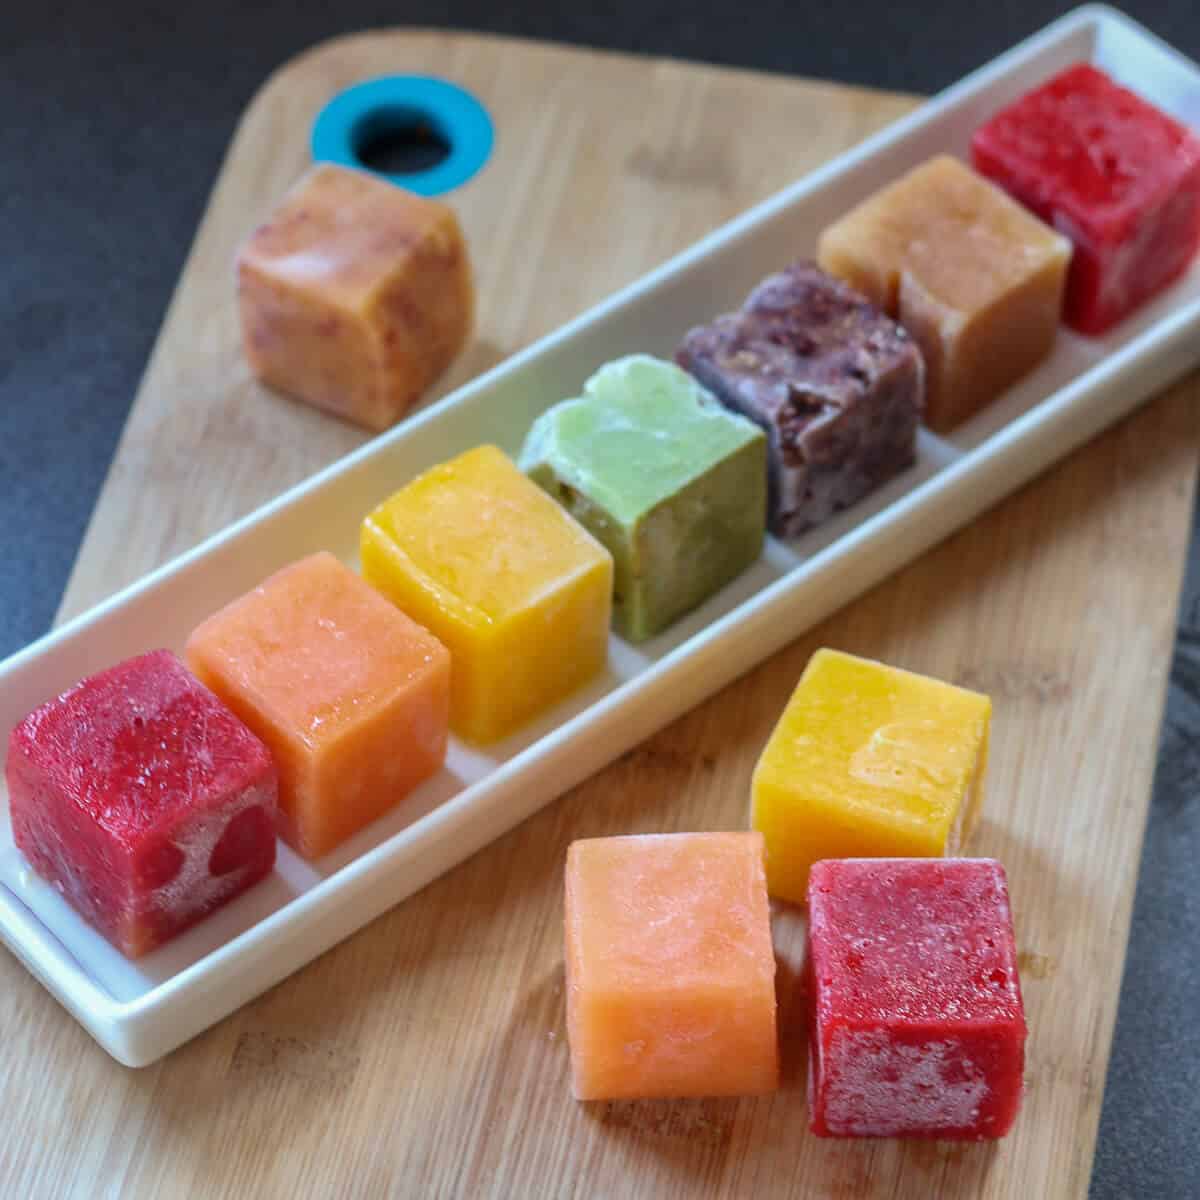 https://thethingswellmake.com/wp-content/uploads/2013/07/16-no-wm-fruit-ice-cubes-freezing-fruit-for-smoothies-or-homemade-baby-food-4.jpg